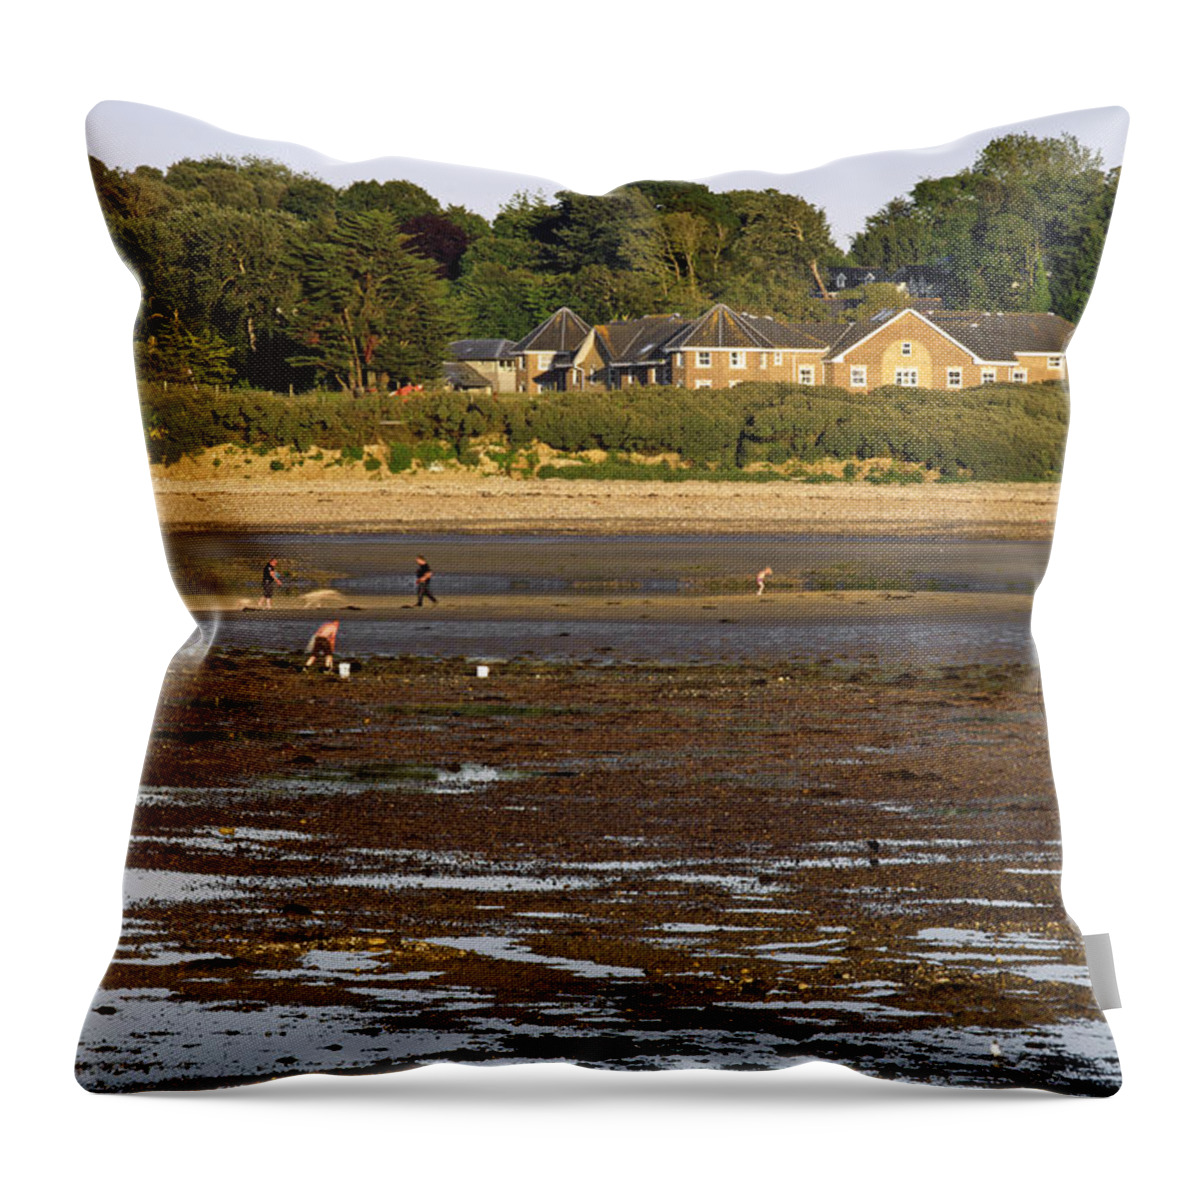 Bright Throw Pillow featuring the photograph Bait Digging At Bembridge by Rod Johnson